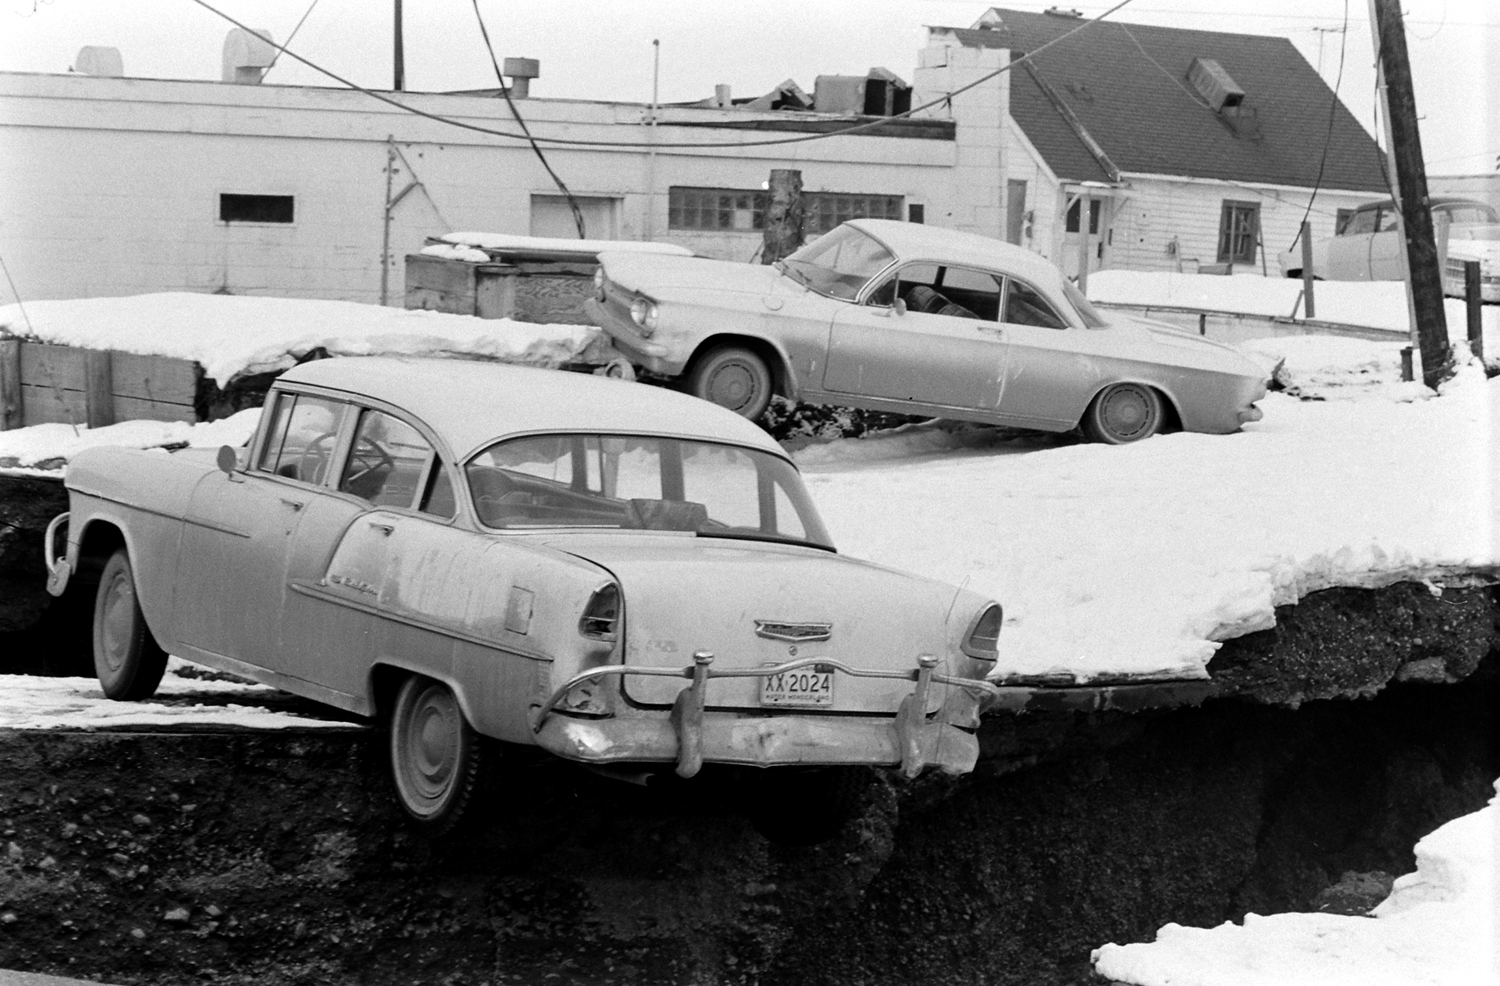 After the March 1964 Good Friday Earthquake, Alaska.